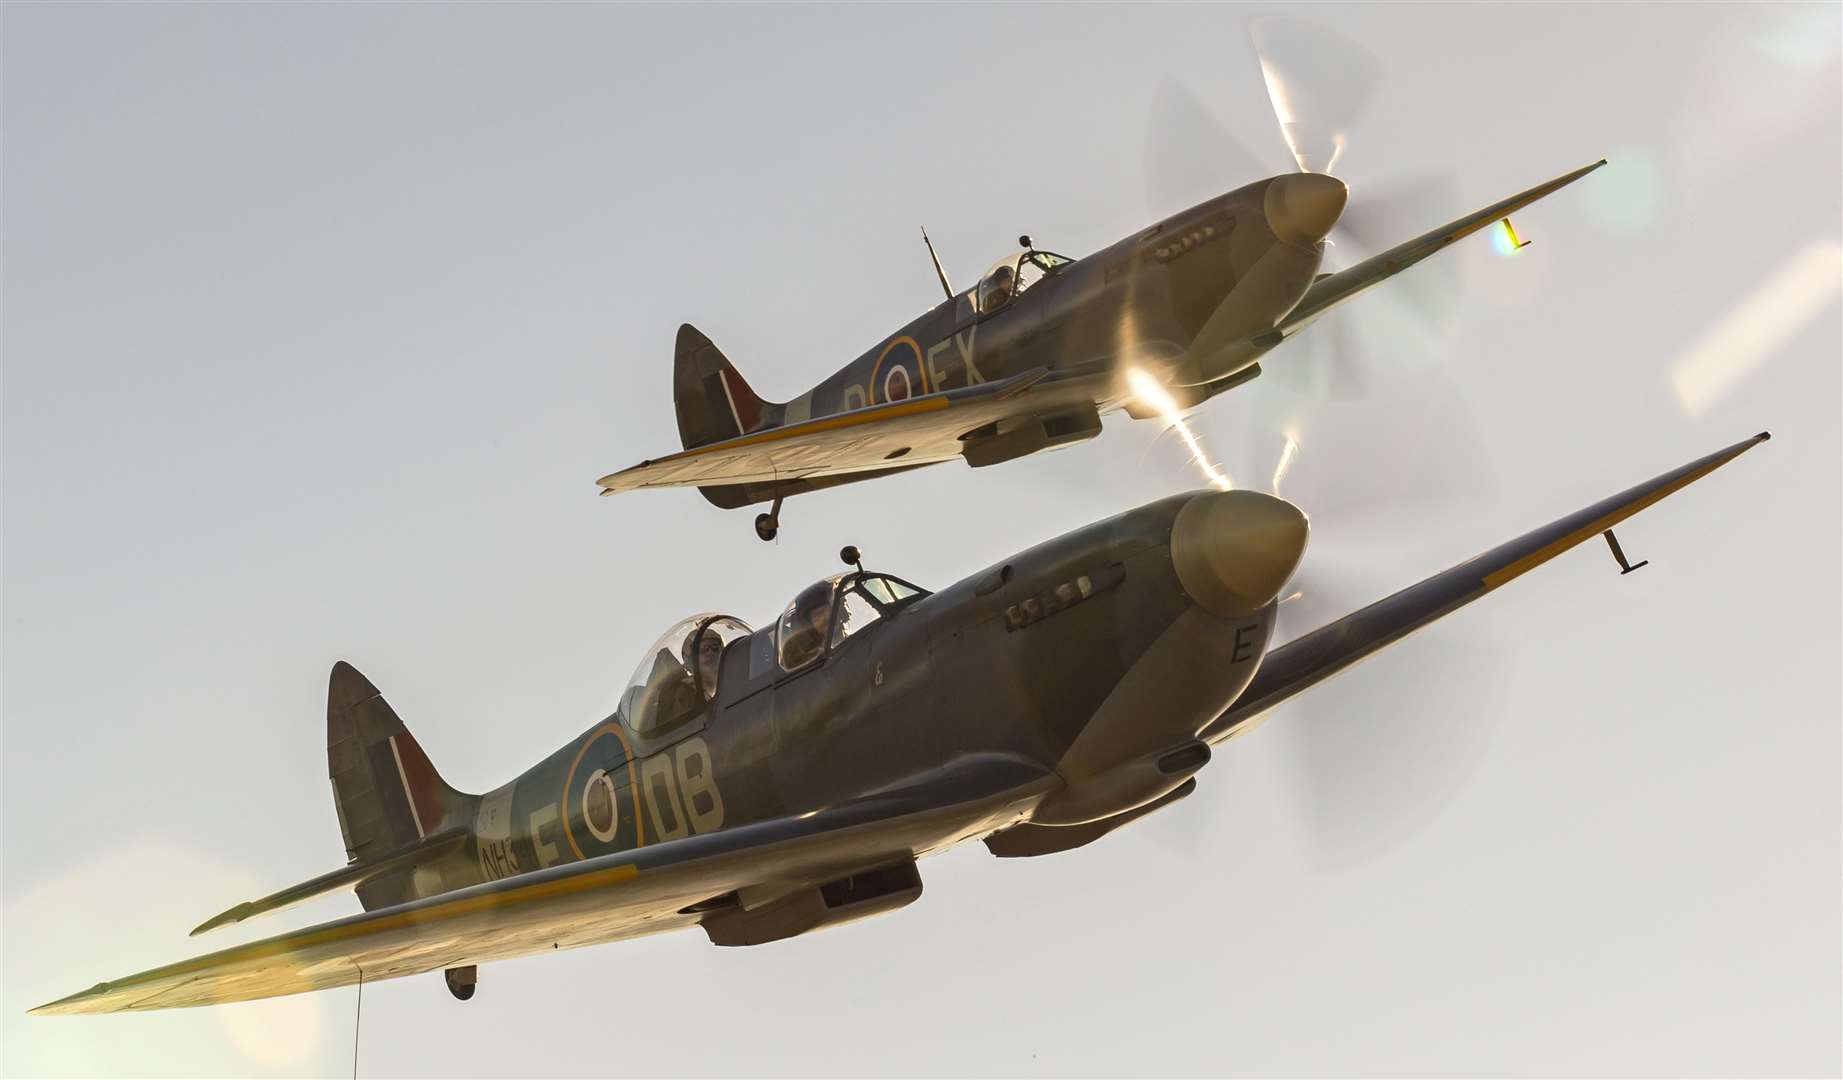 Combined Ops will see wartime craft in the skies above Headcorn Picture: Darren Harbar